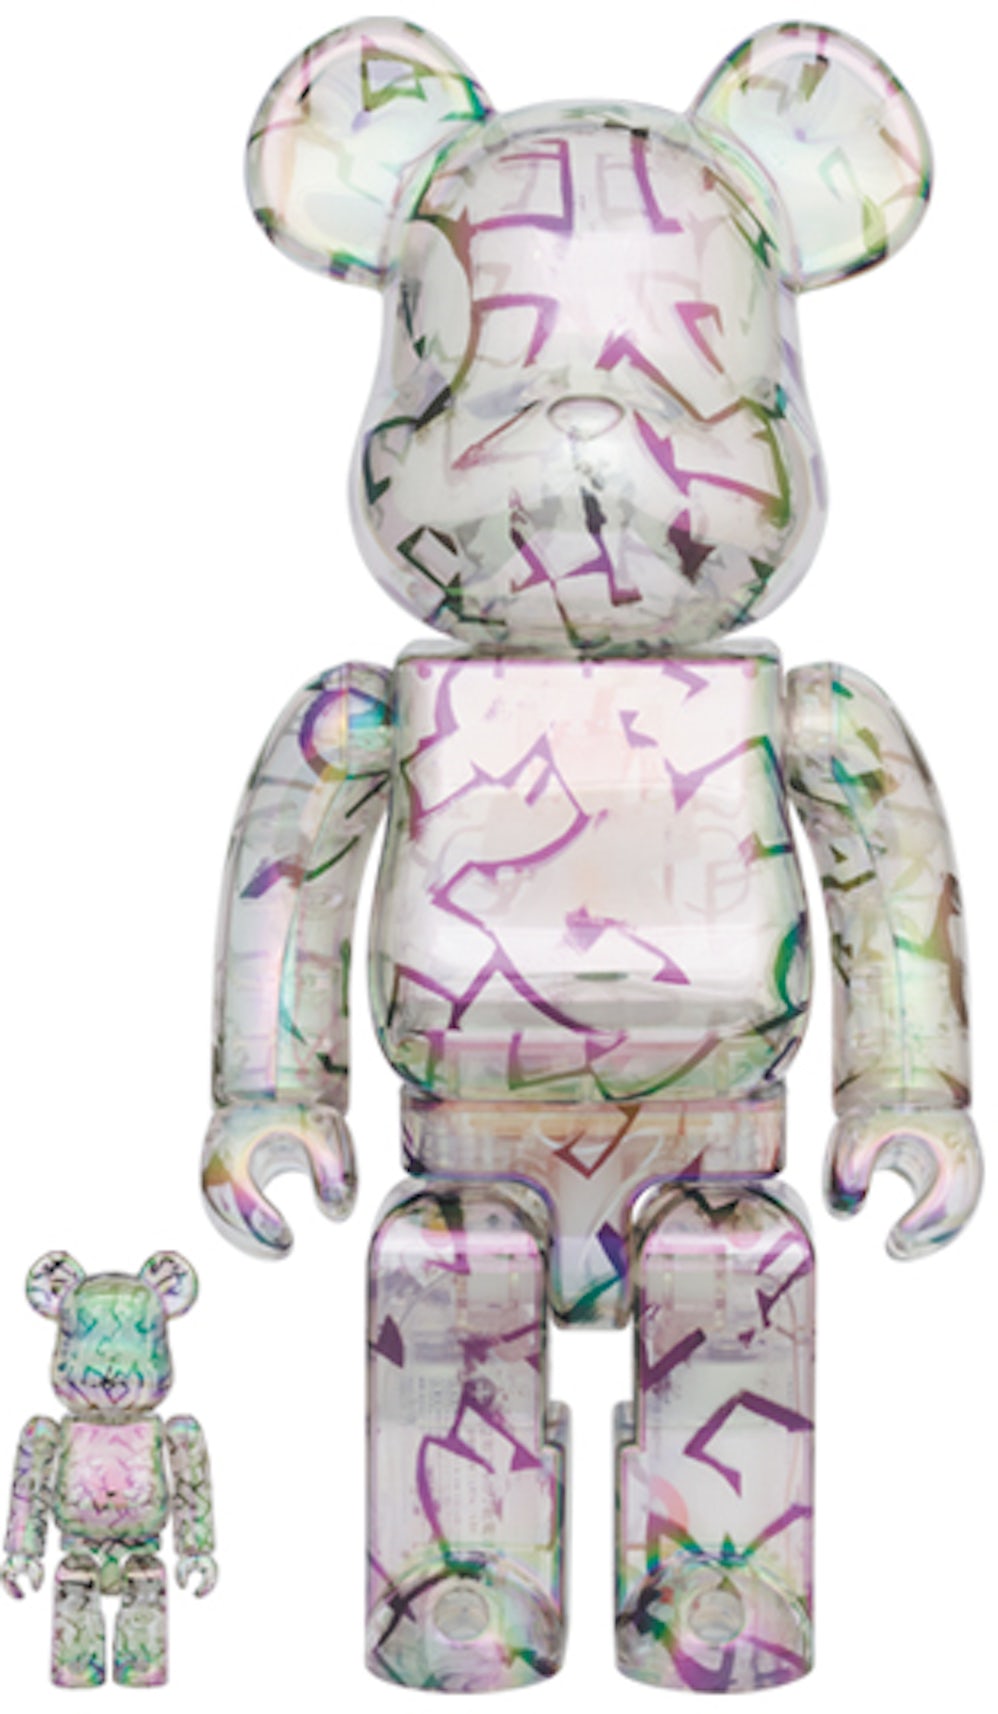 The Exclusive GEO x Medicom BE@RBRICK Offers Varied Perspectives on Light